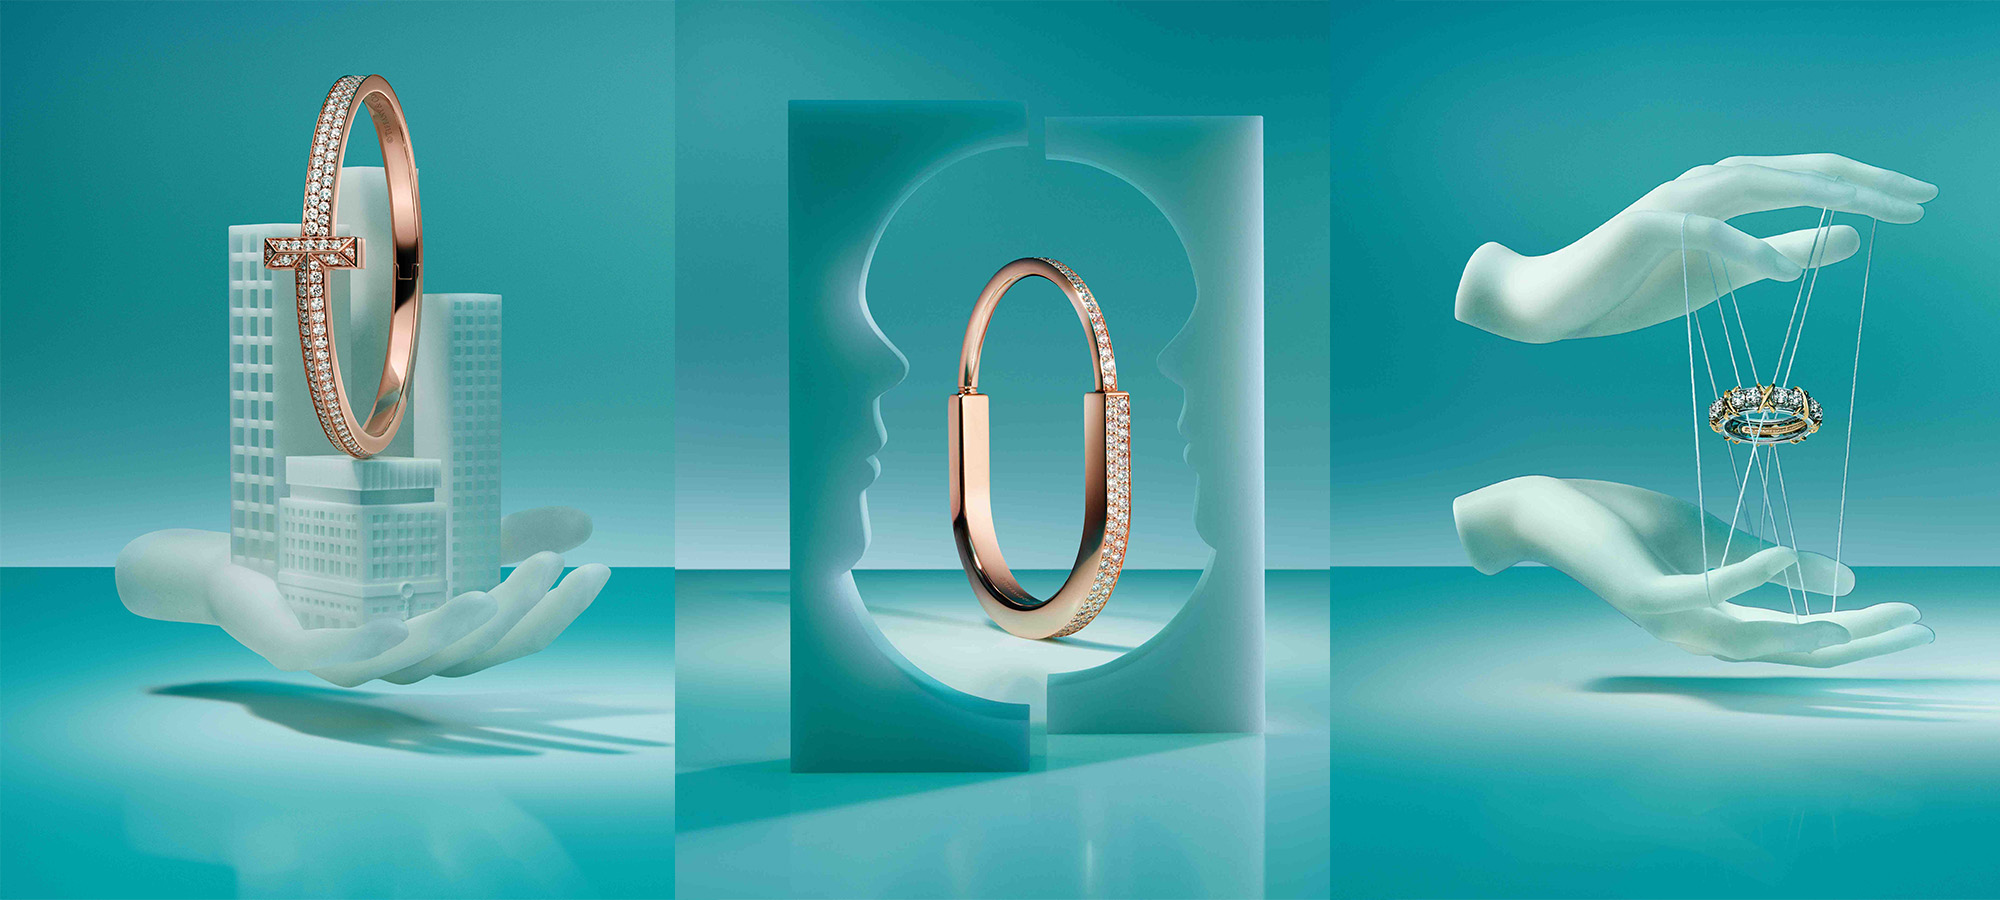 The Tiffany & Co. “With Love, Since 1837” Campaign Is A Work Of Art